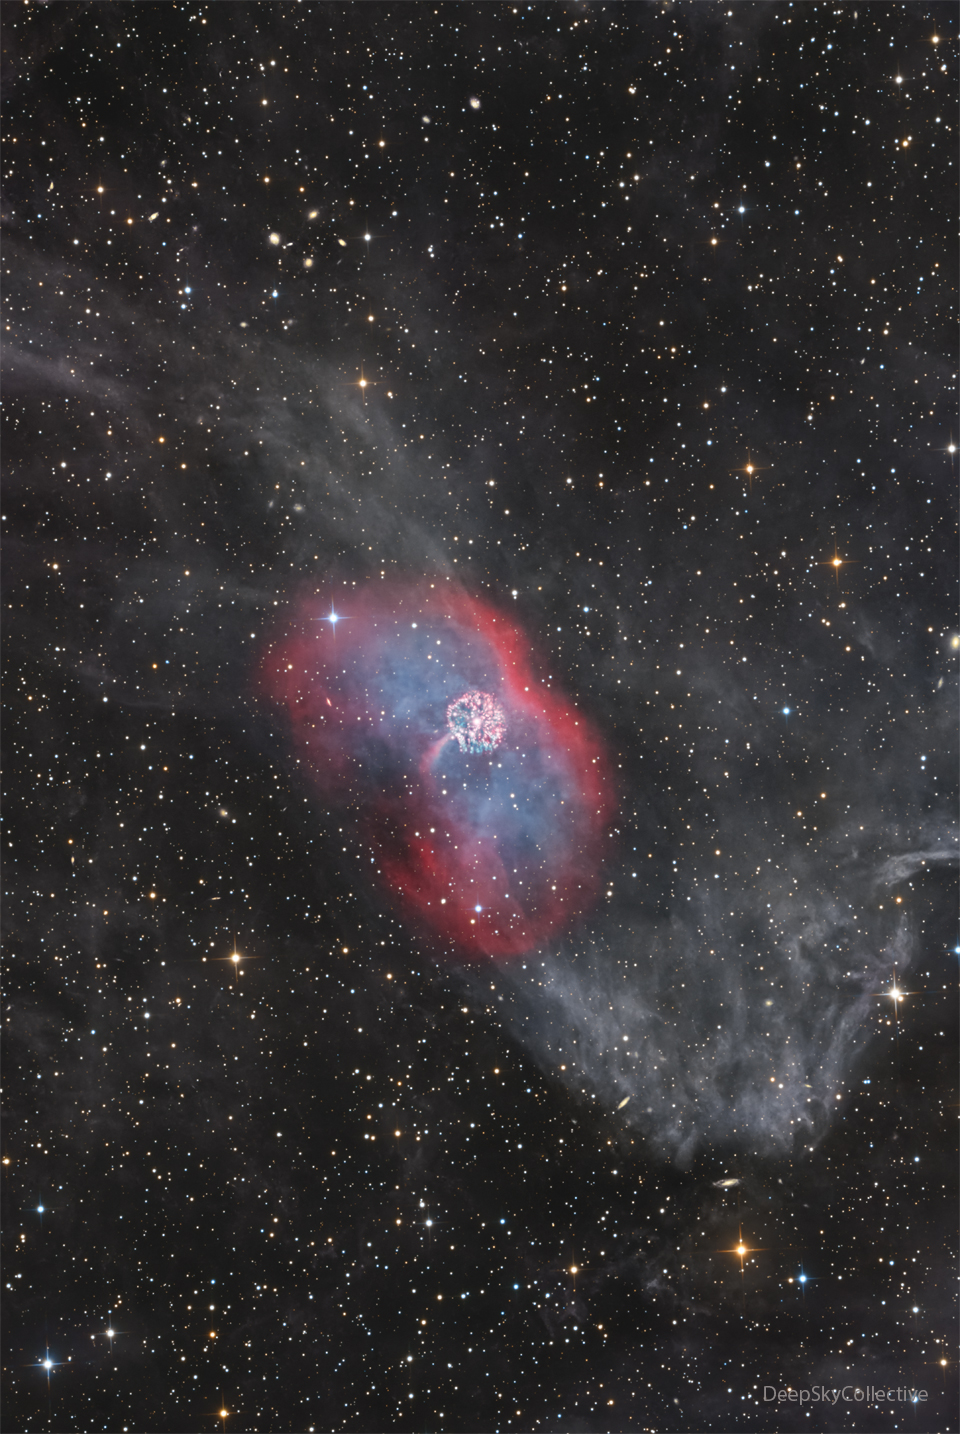 A faint nebula runs vertically in the image. In the
center is a red envelope surrounding diffuse blue emission.
In the center is a bright multicolored nebula that is 
nearly circular. 
Please see the explanation for more detailed information.